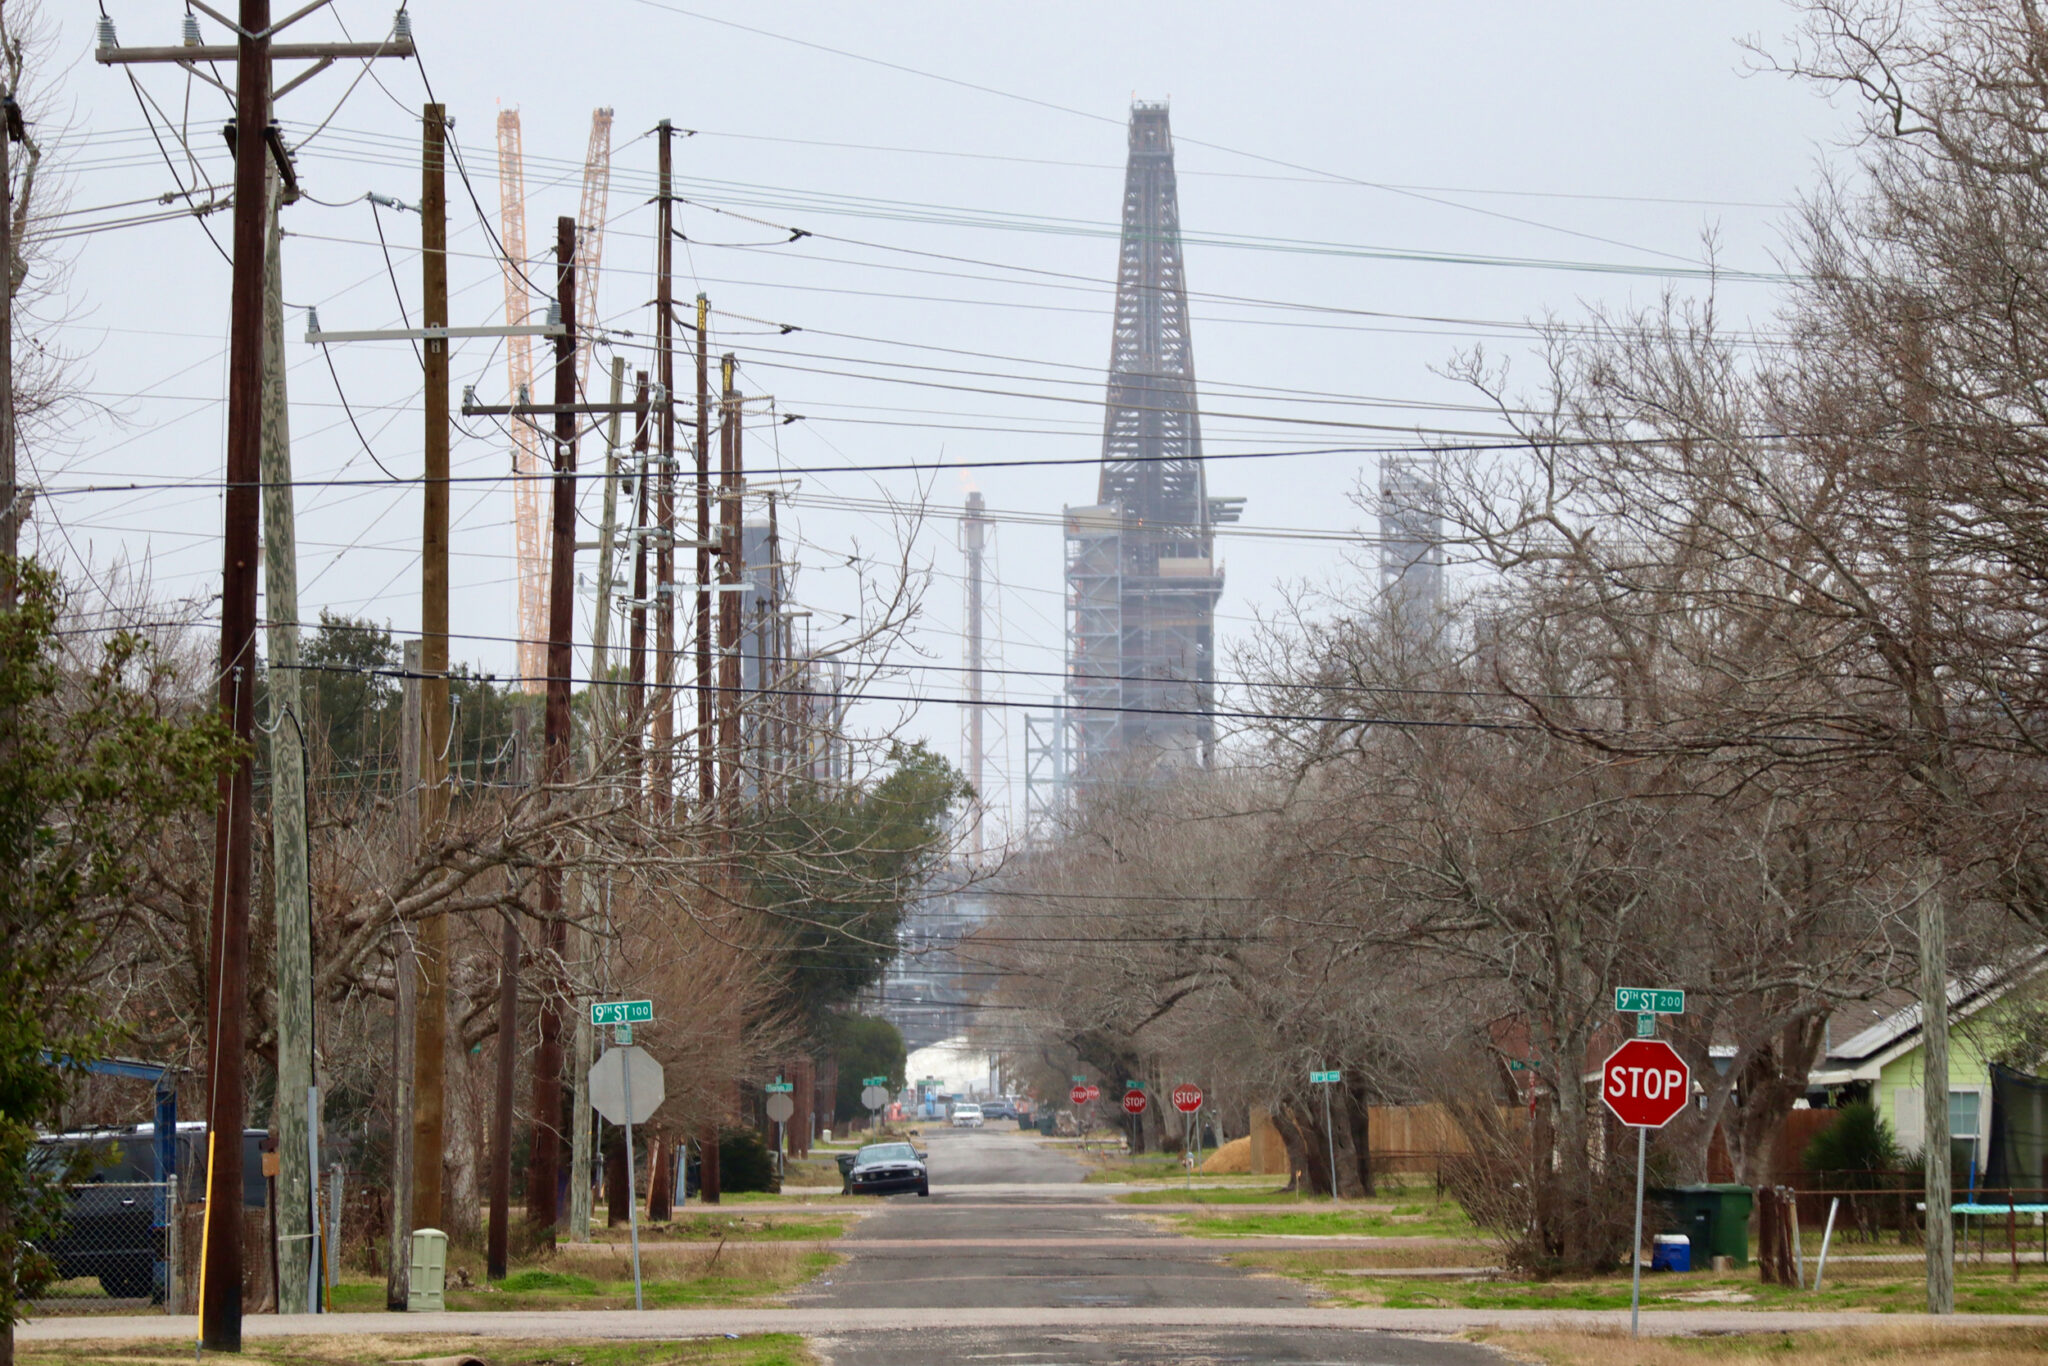 The Motiva oil refinery, the largest in the United States, looms over a residential neighborhood in Port Arthur, Texas. 